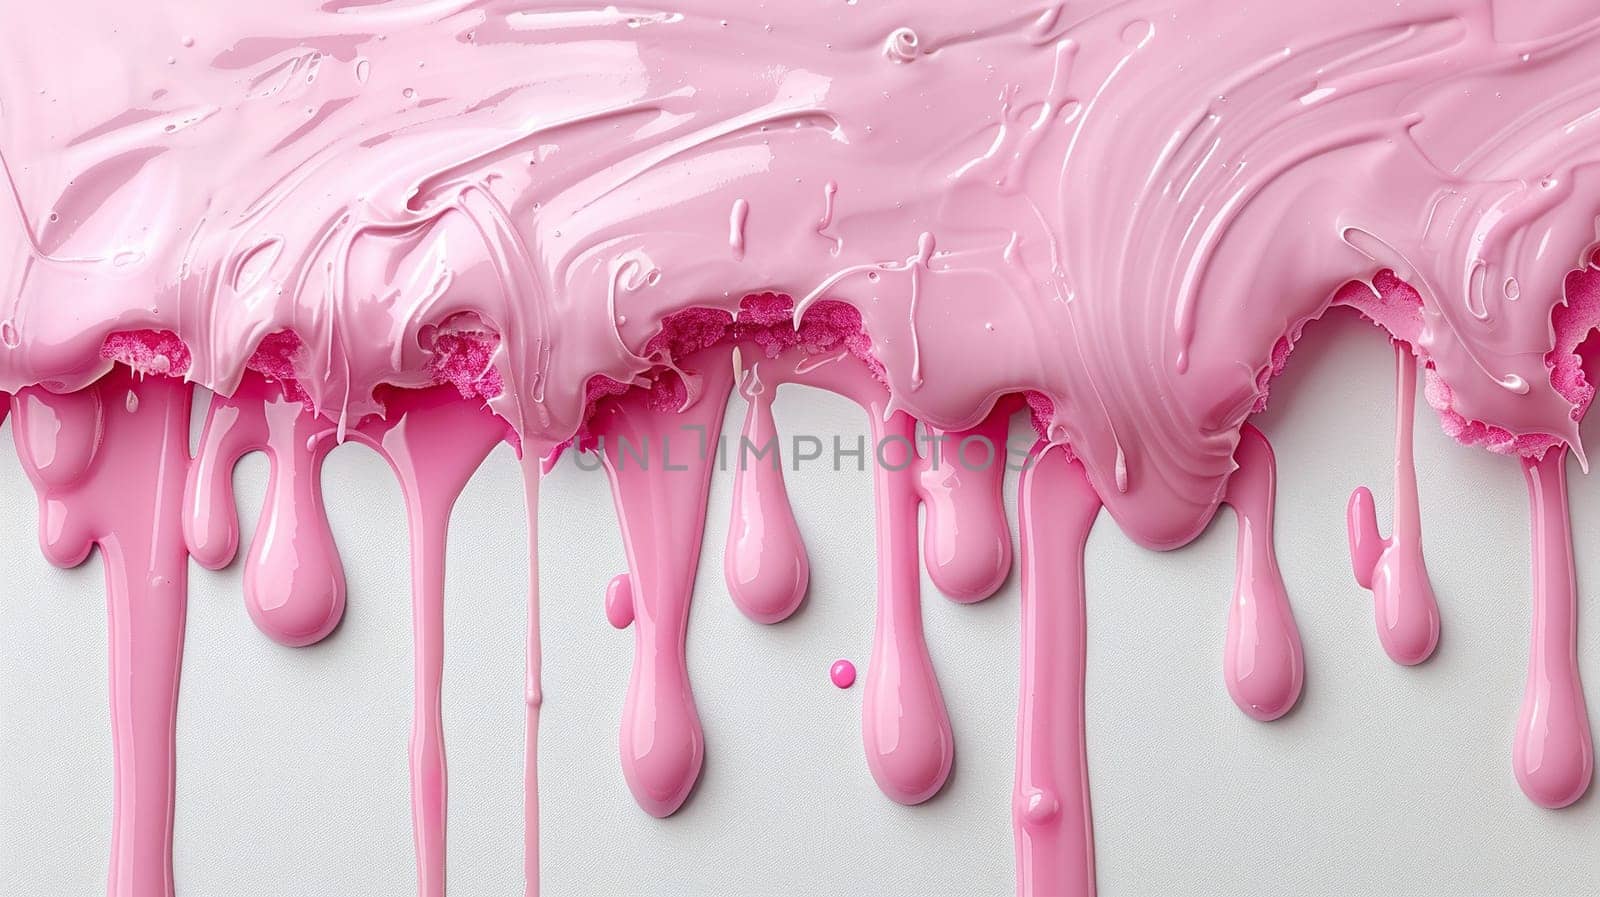 Pink icing flows down the white background from top to bottom. Generated by artificial intelligence by Vovmar